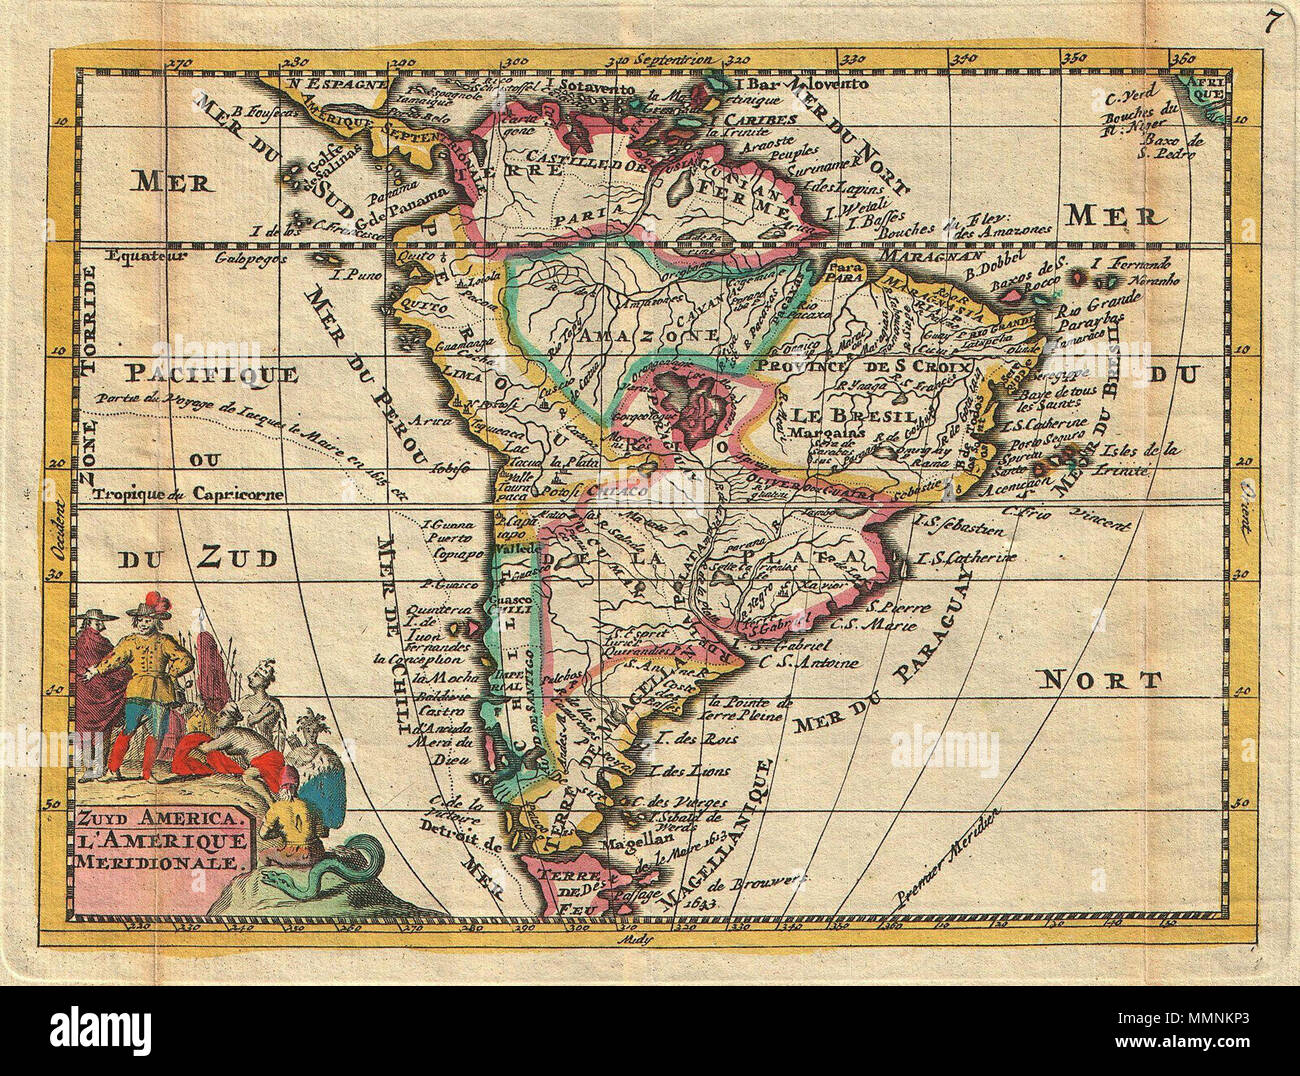 .  English: A stunning map of South America first drawn by Daniel de la Feuille in 1706. Continent is represented according to the 18th century political geography. Labels several important cities including Cusco, Quito, Lima, San Sebastian, and Cartagena. Shows two large imaginary lakes in the interior. Title cartouche in the lower left hand quadrant features stylized images of Native Americans offering gifts to Europeans while an enormous and eerily grinning serpent looks on. Title in both Dutch and French. This is Paul de la Feuille’s 1747 reissue of his father Daniel’s 1706 map. Prepared f Stock Photo